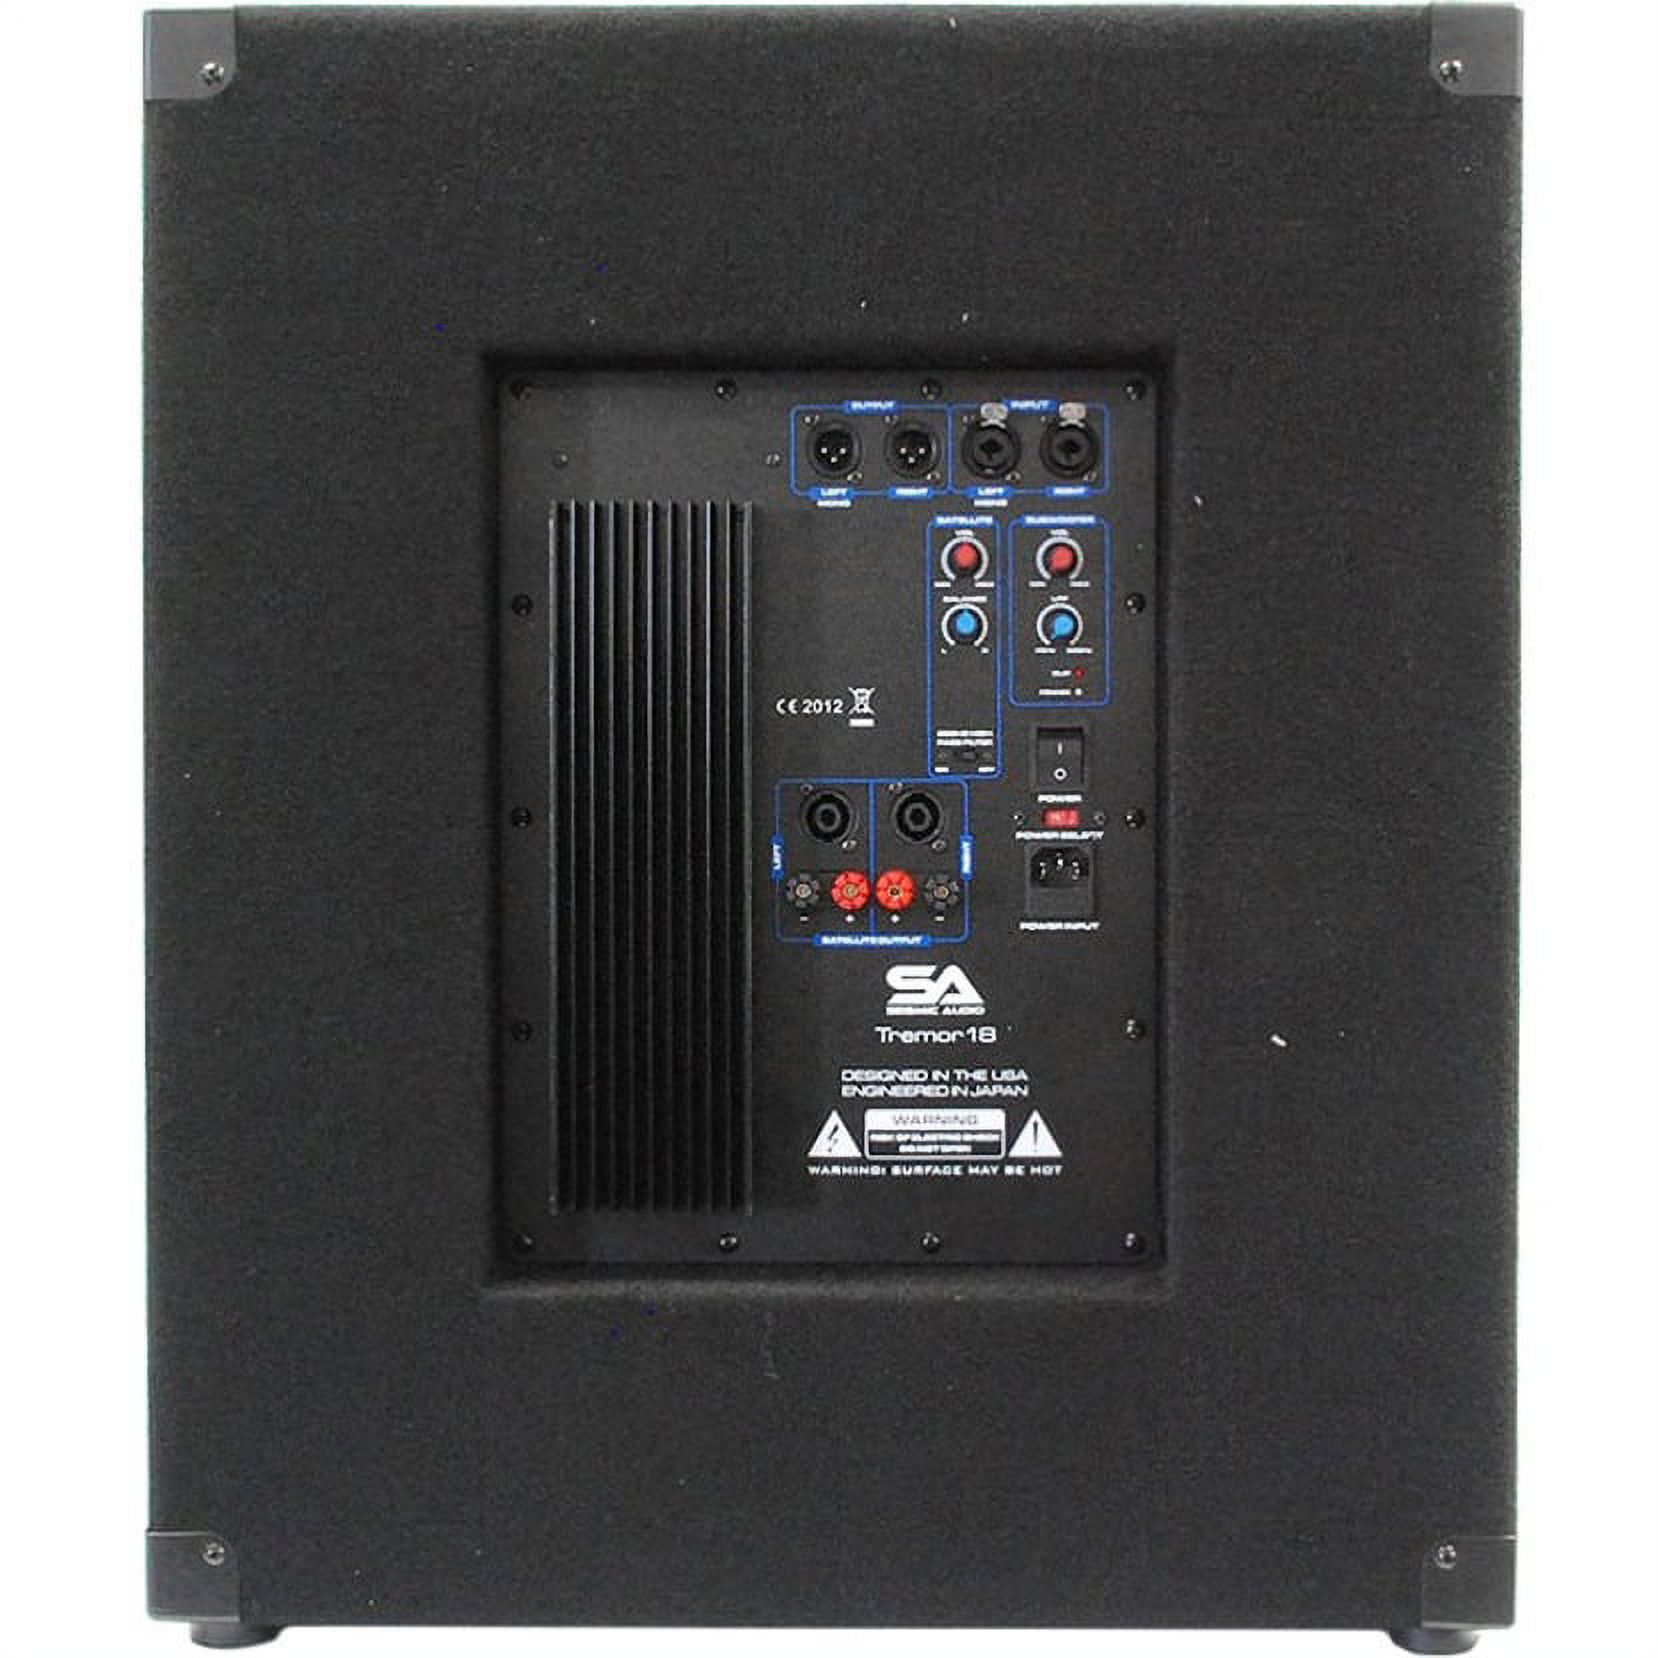 Seismic Audio Tremor 18 Subwoofer System, 500 W RMS, Black - image 3 of 6